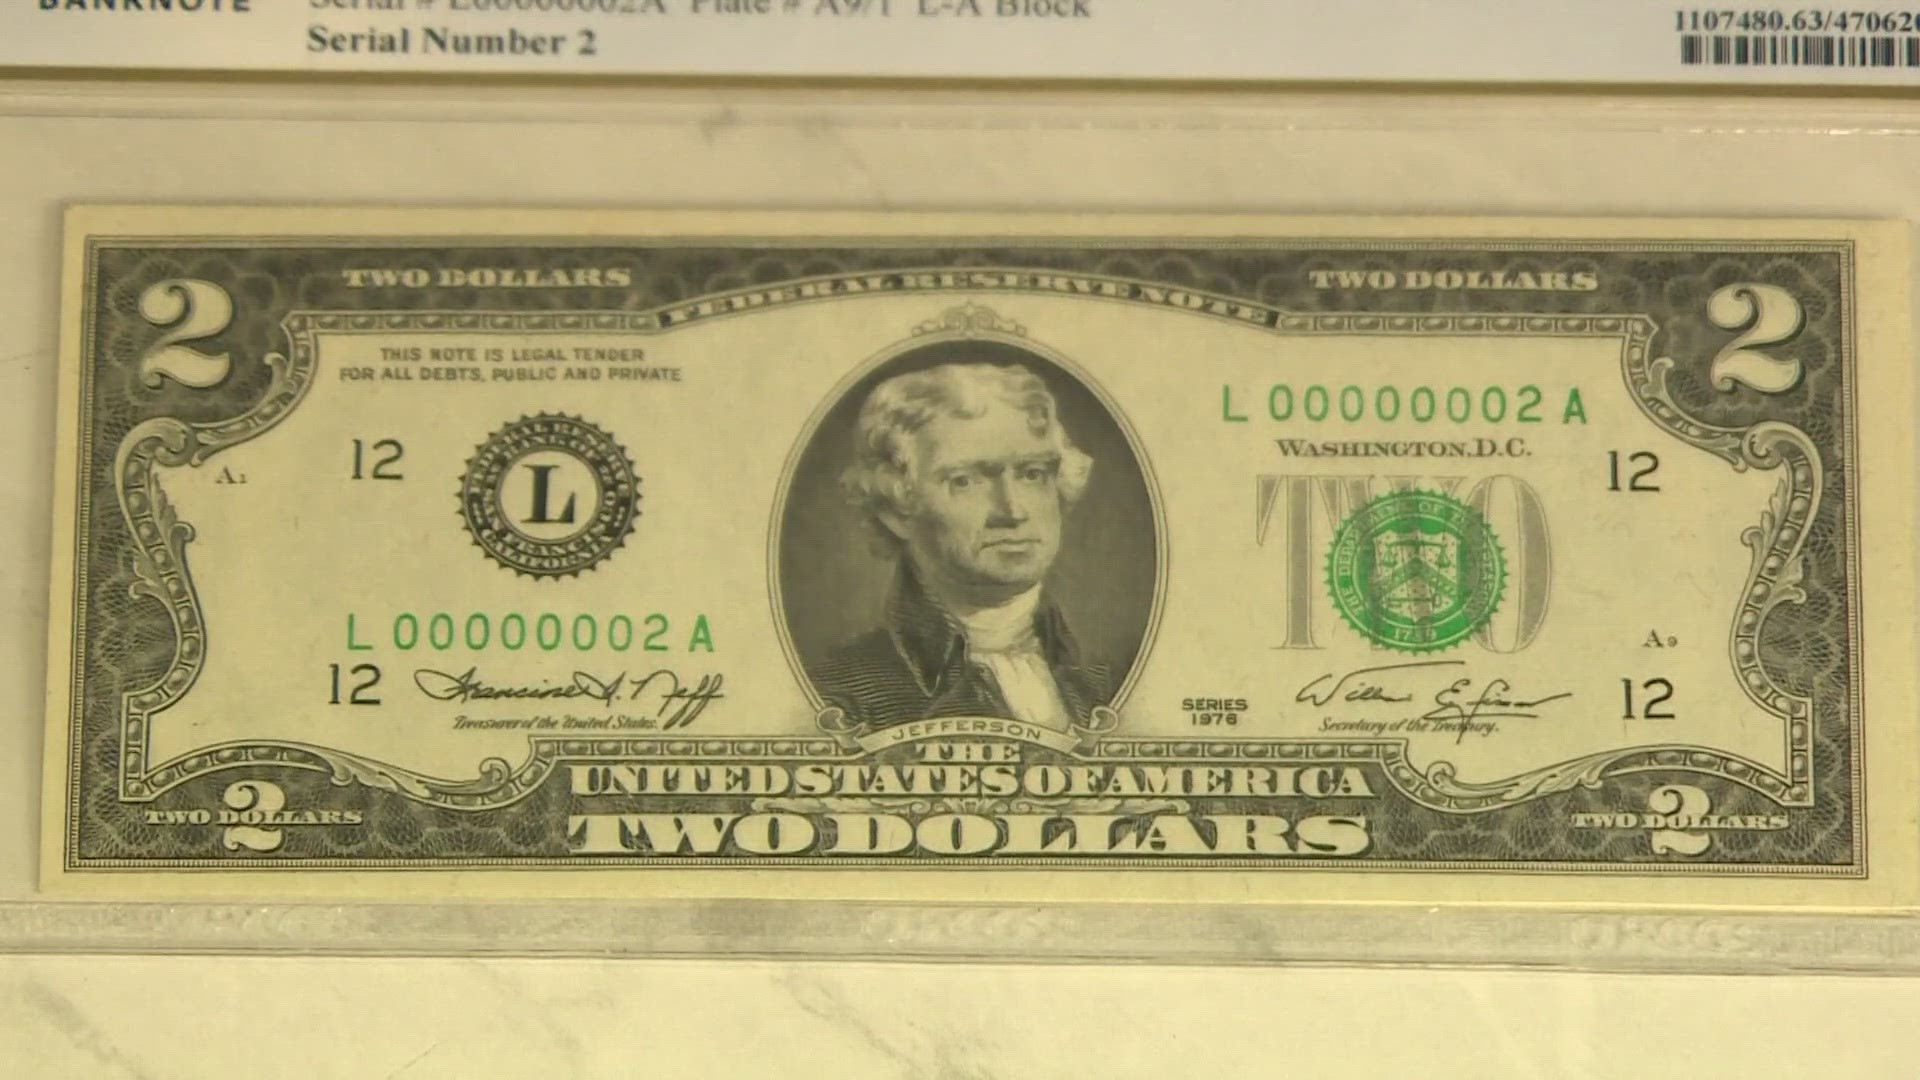 Check your wallet: $2 bills could now be worth thousands